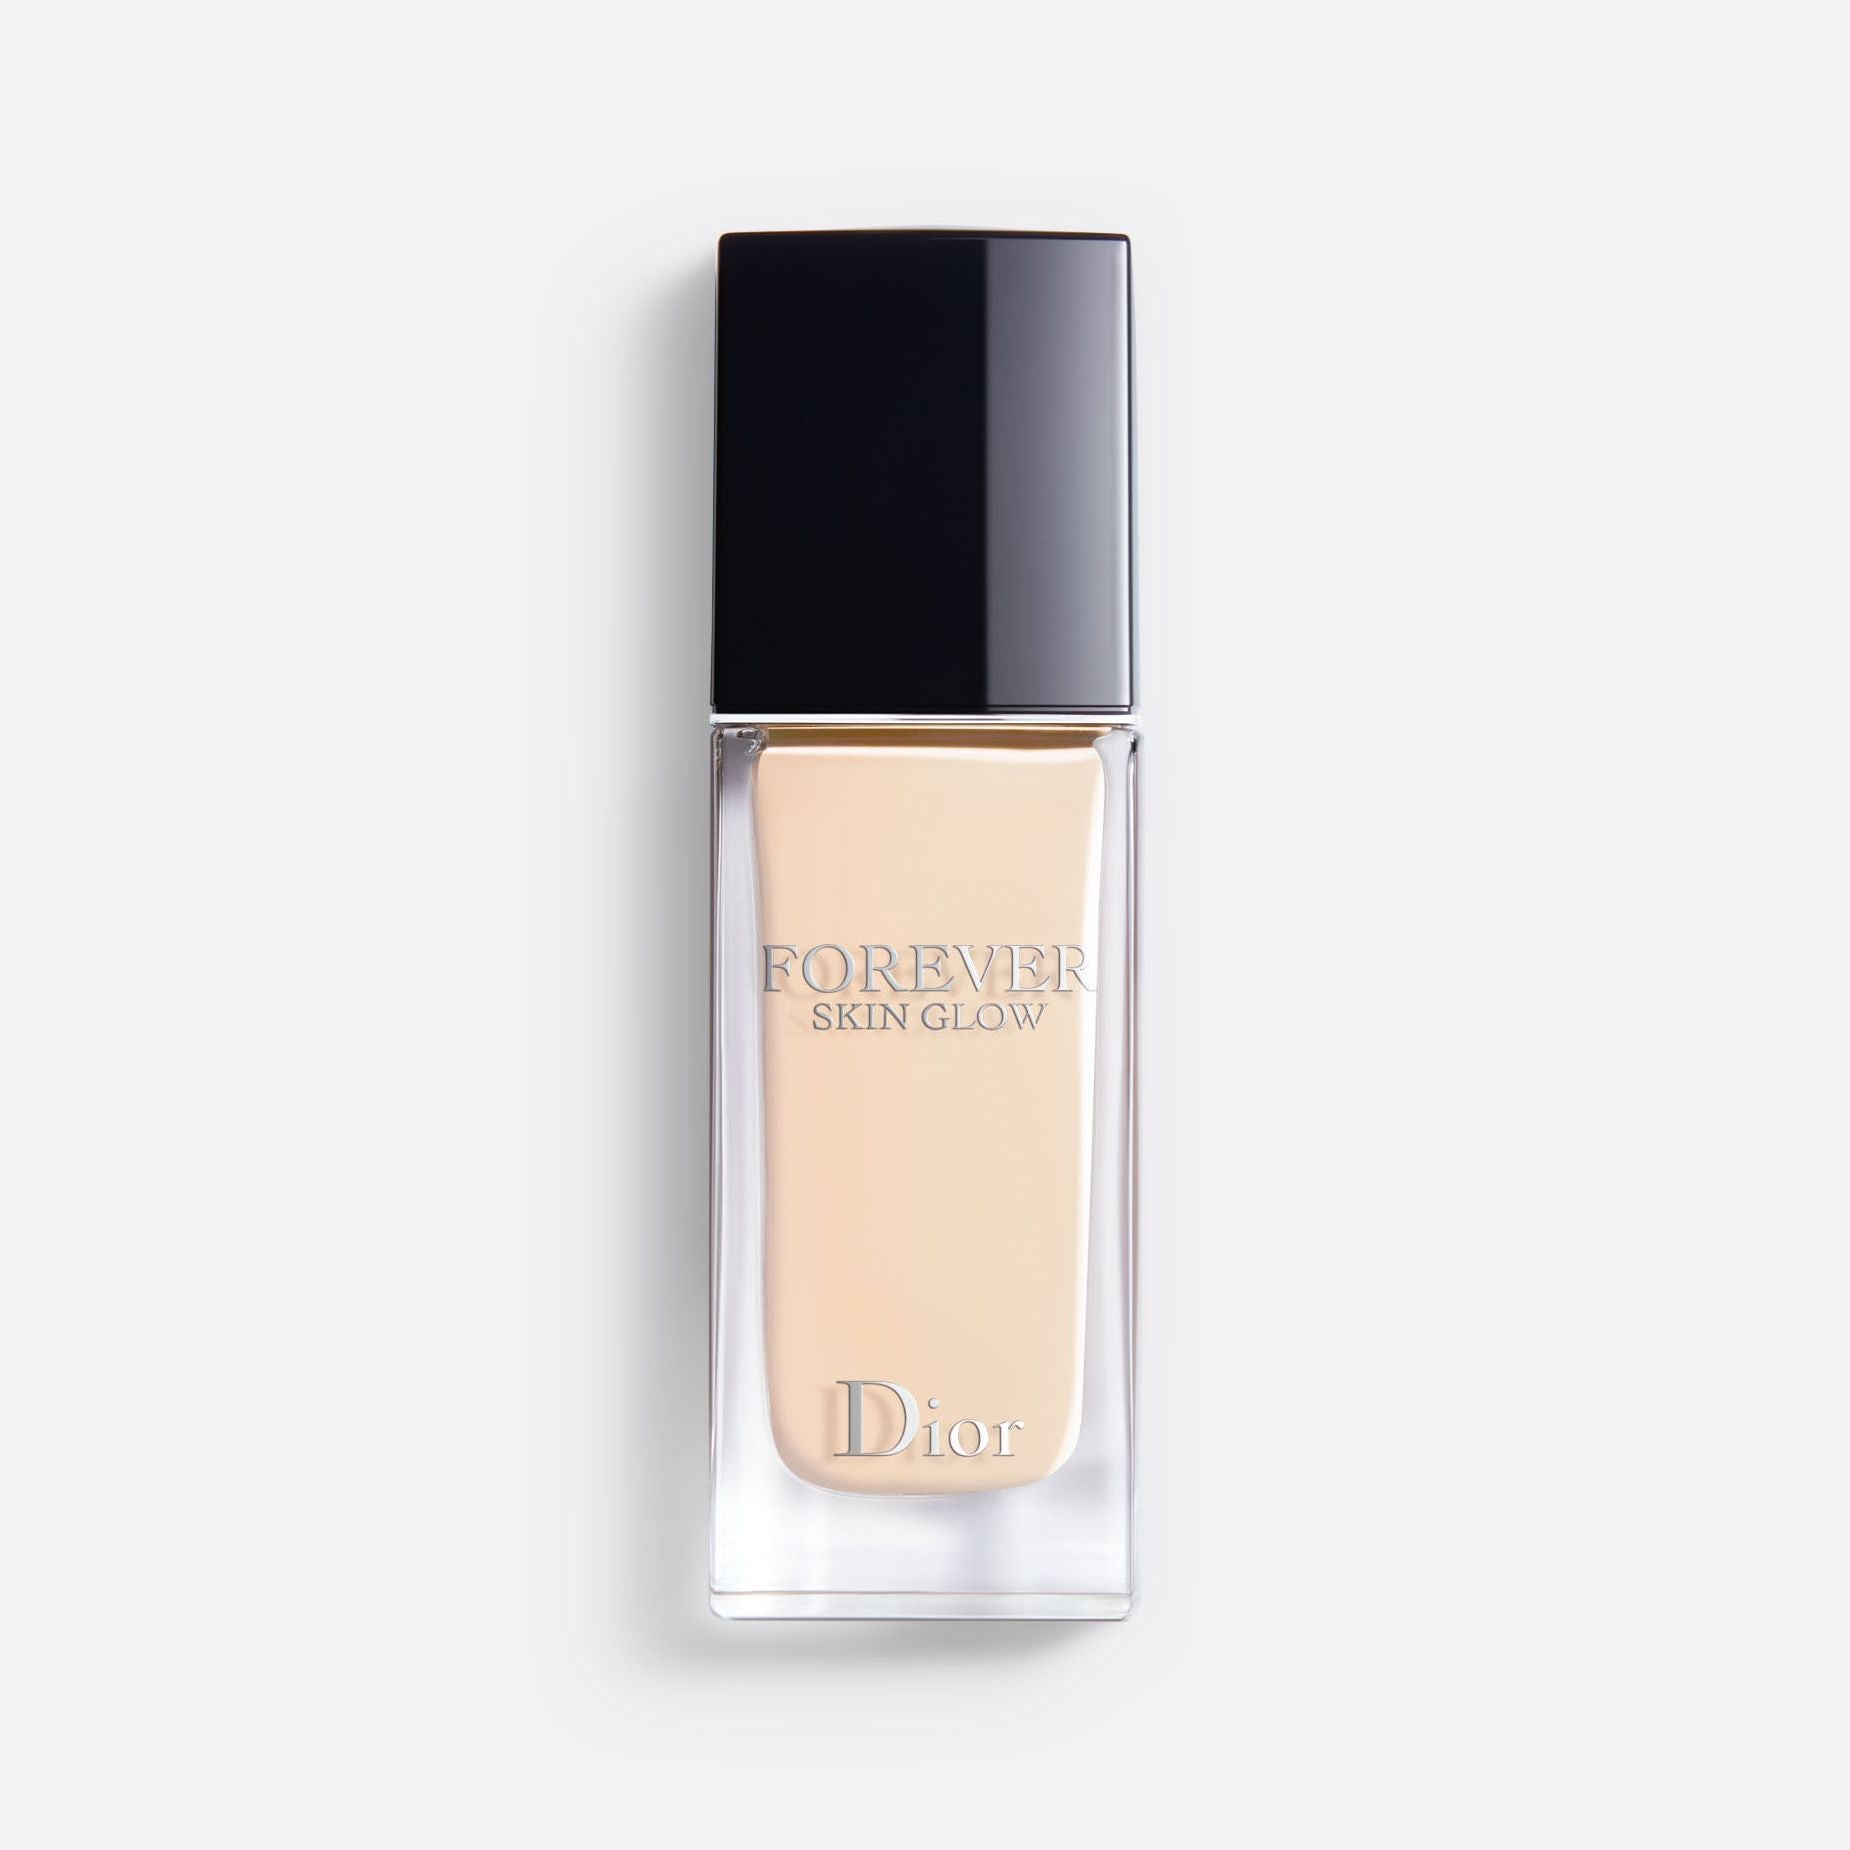 DIOR FOREVER SKIN GLOW ~ Clean radiant foundation - 24h wear and hydration